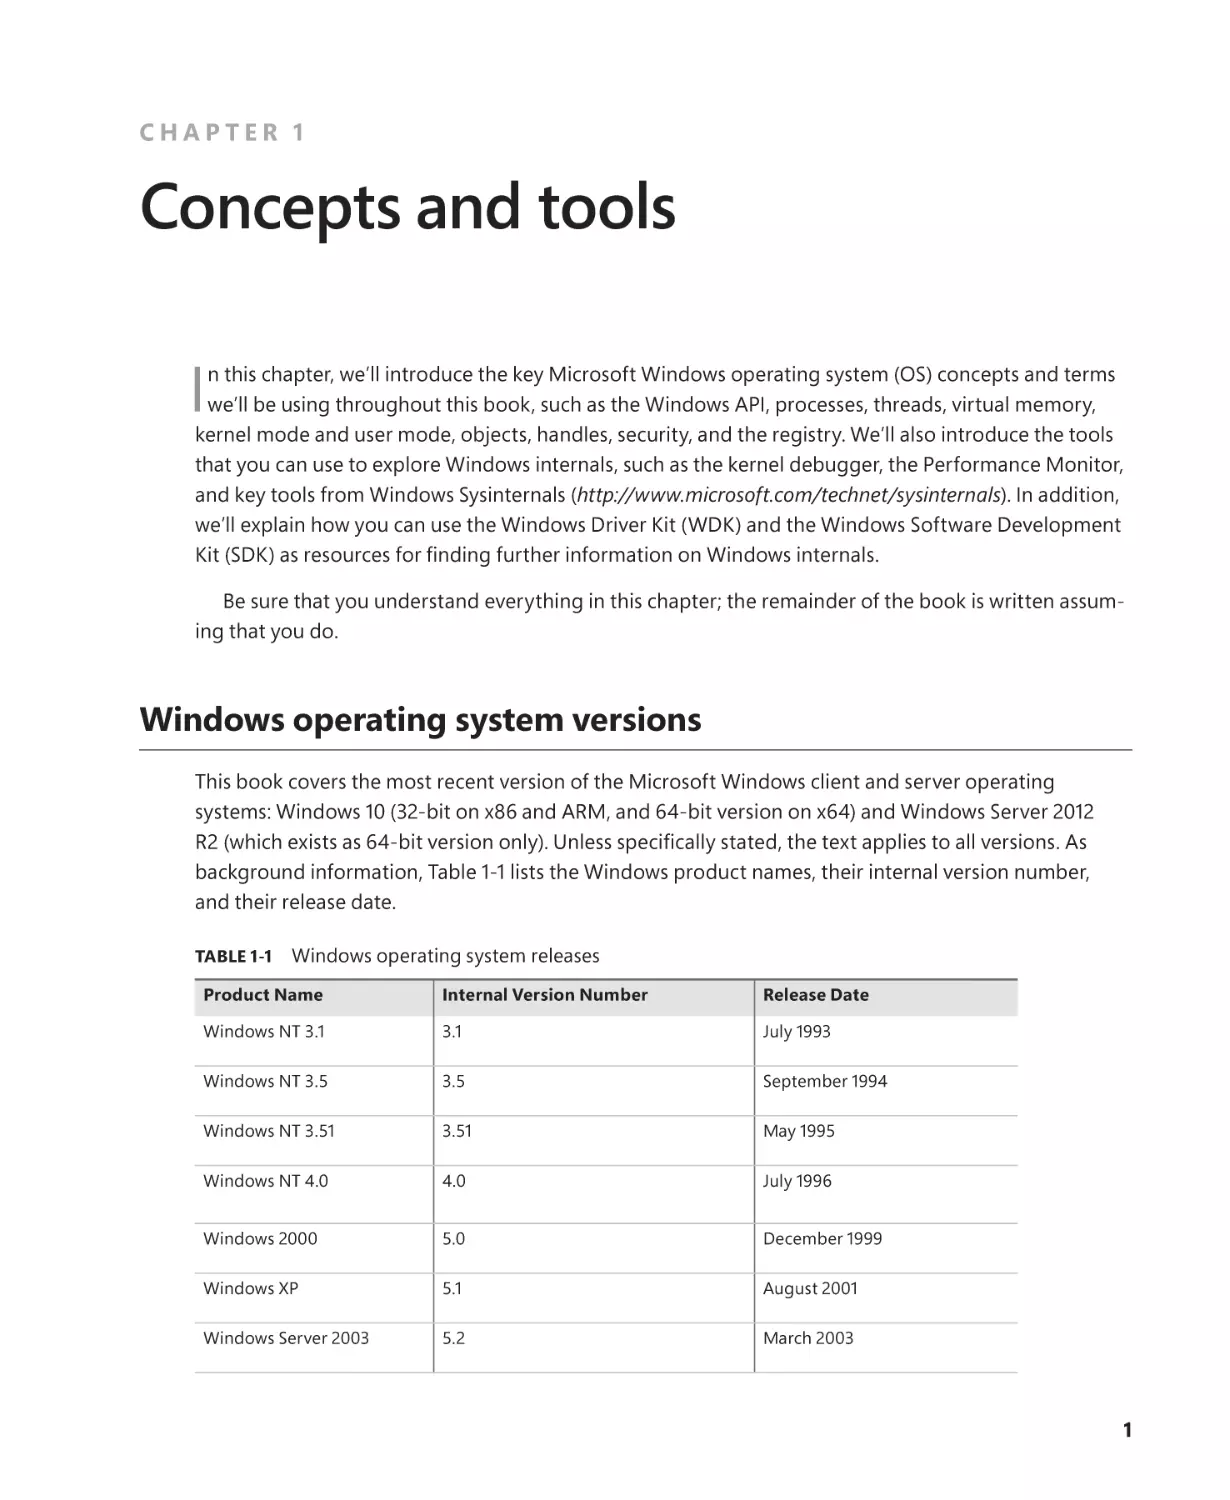 Chapter 1 Concepts and tools
Windows operating system versions